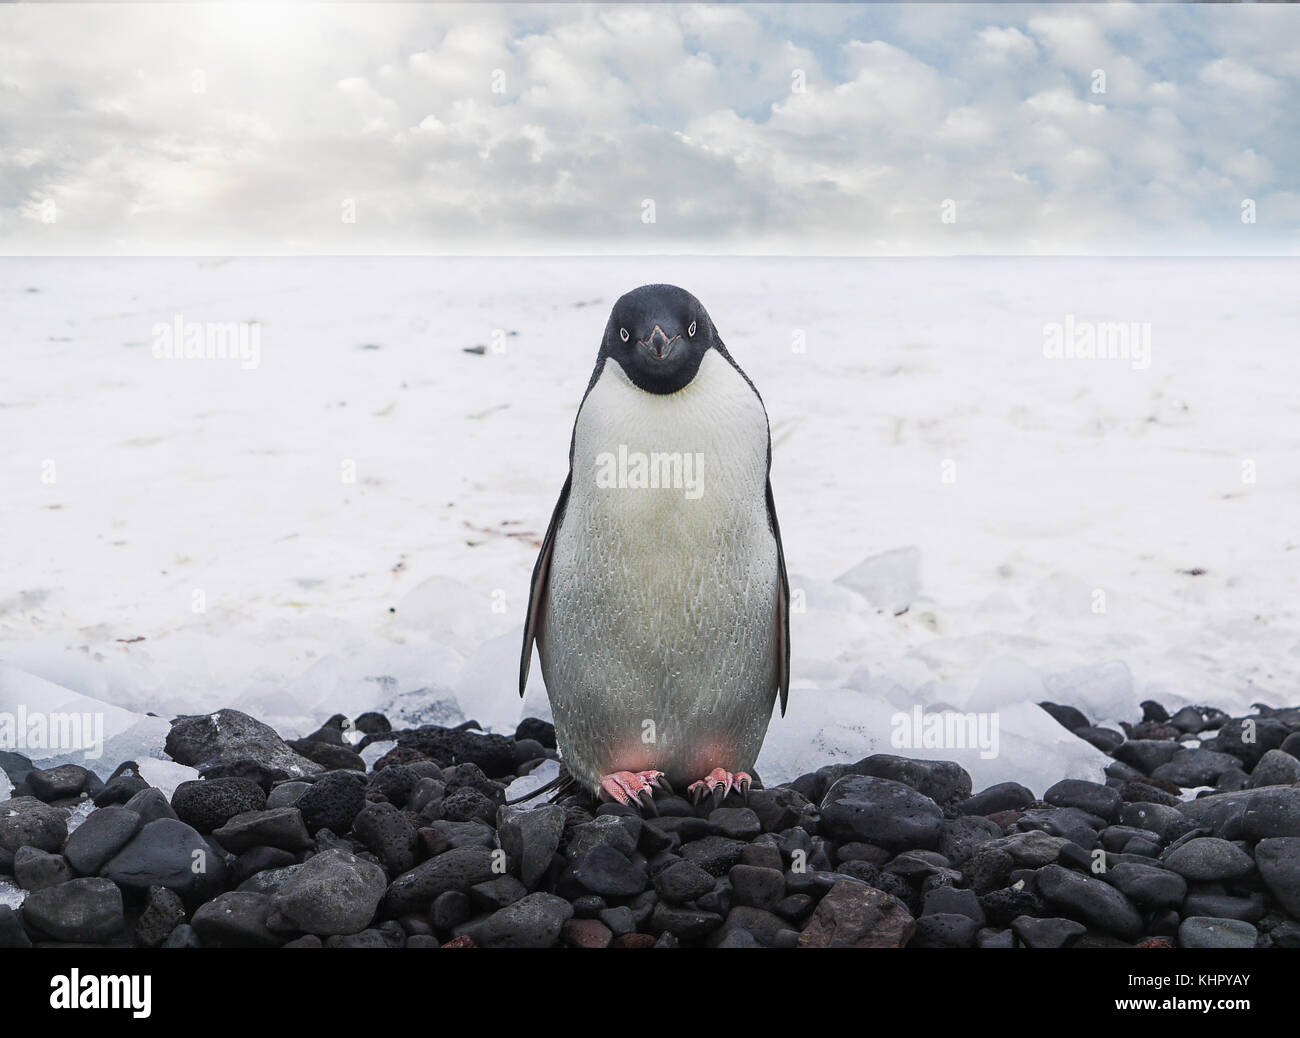 A close up view of a cute adelie penguin facing the camera, standing on a pebble beach on the Antarctic peninsula. Paulet Island, Antarctica. Stock Photo